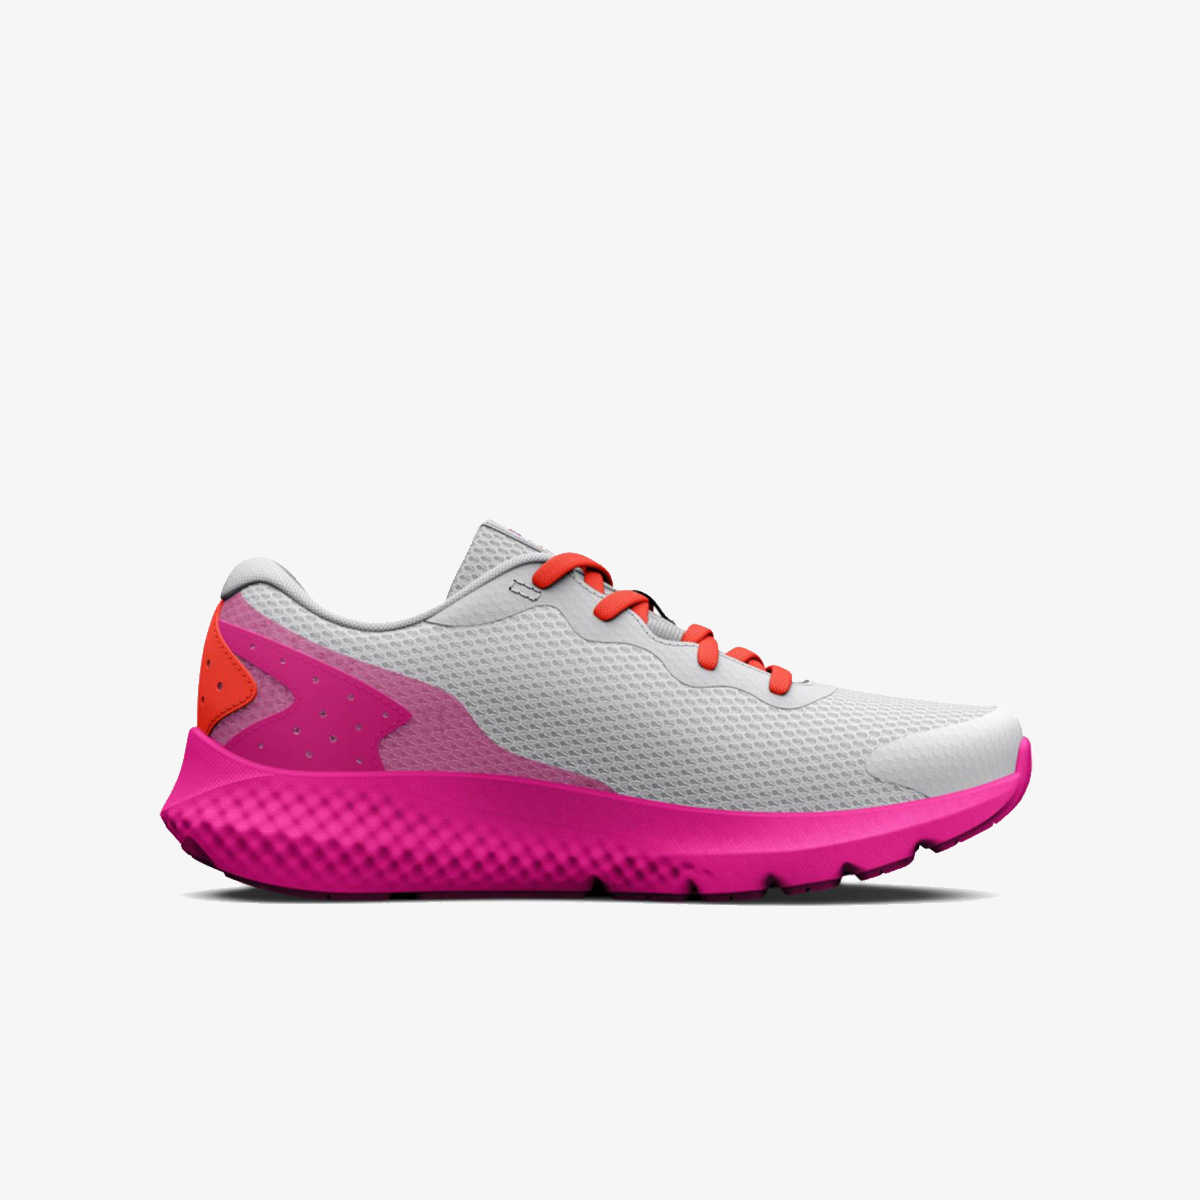 Under Armour Rogue 3 AC 